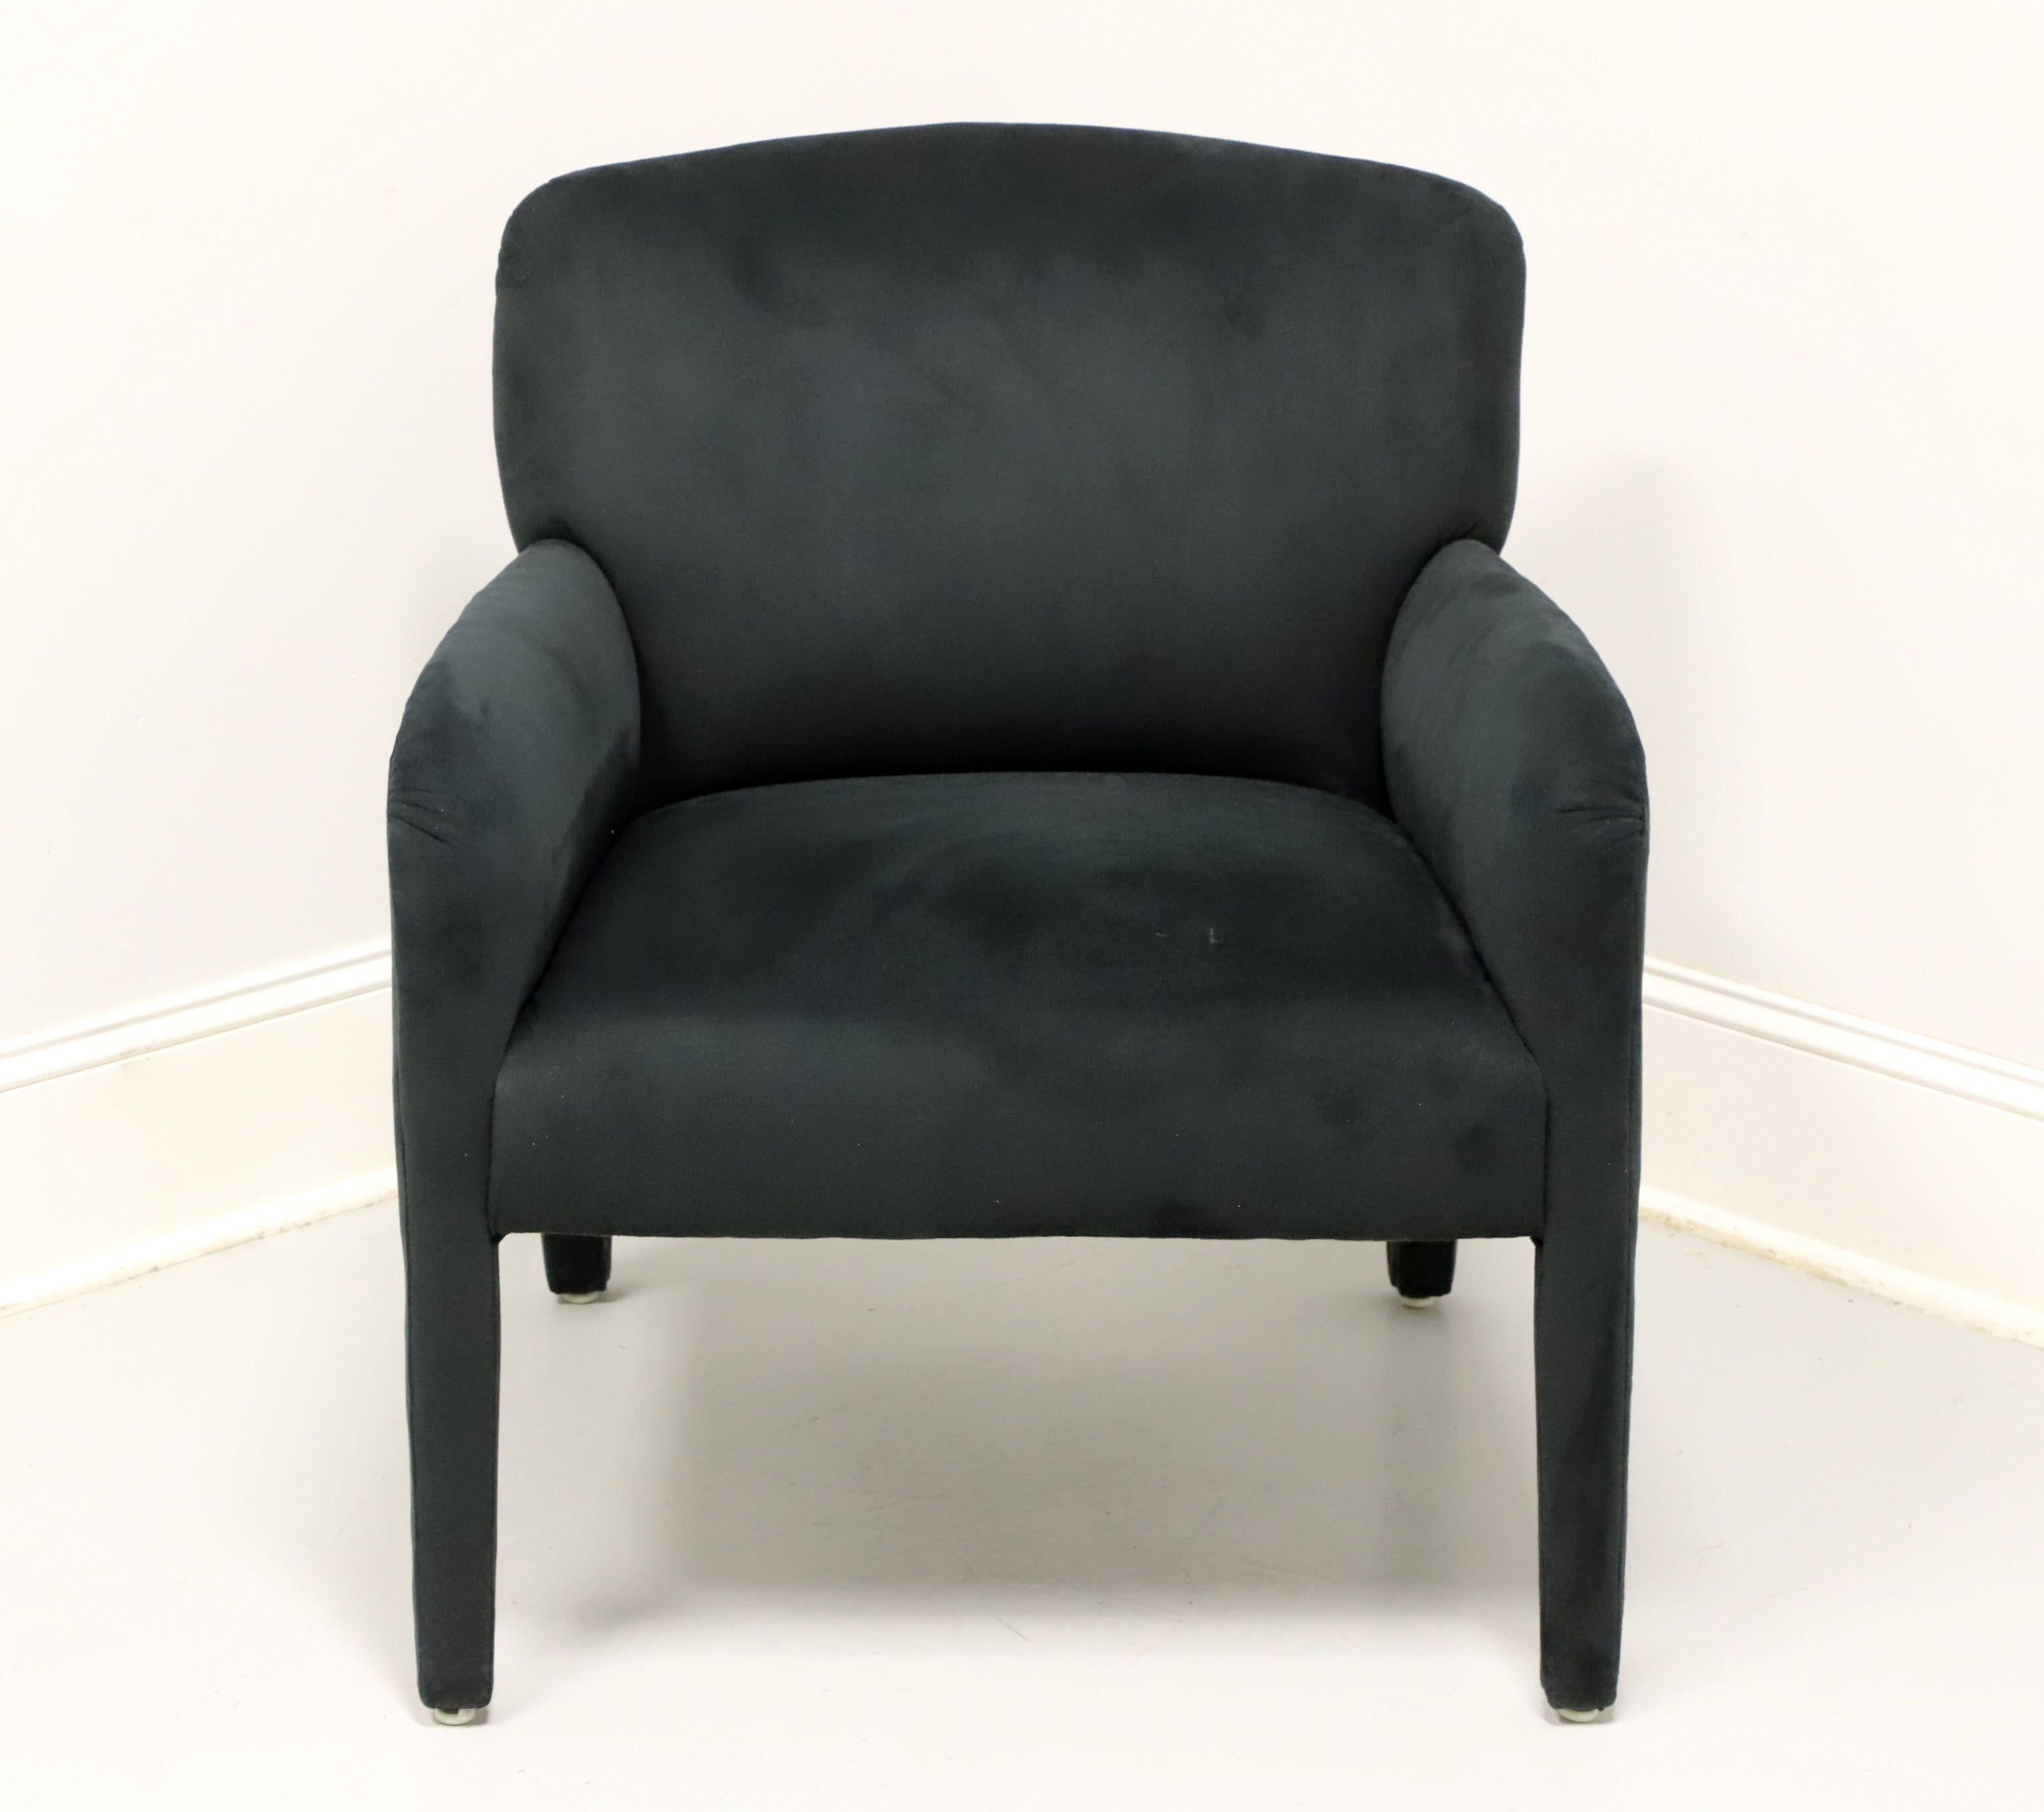 A Contemporary style upholstered club chair by Classic Gallery. Solid wood frame, 